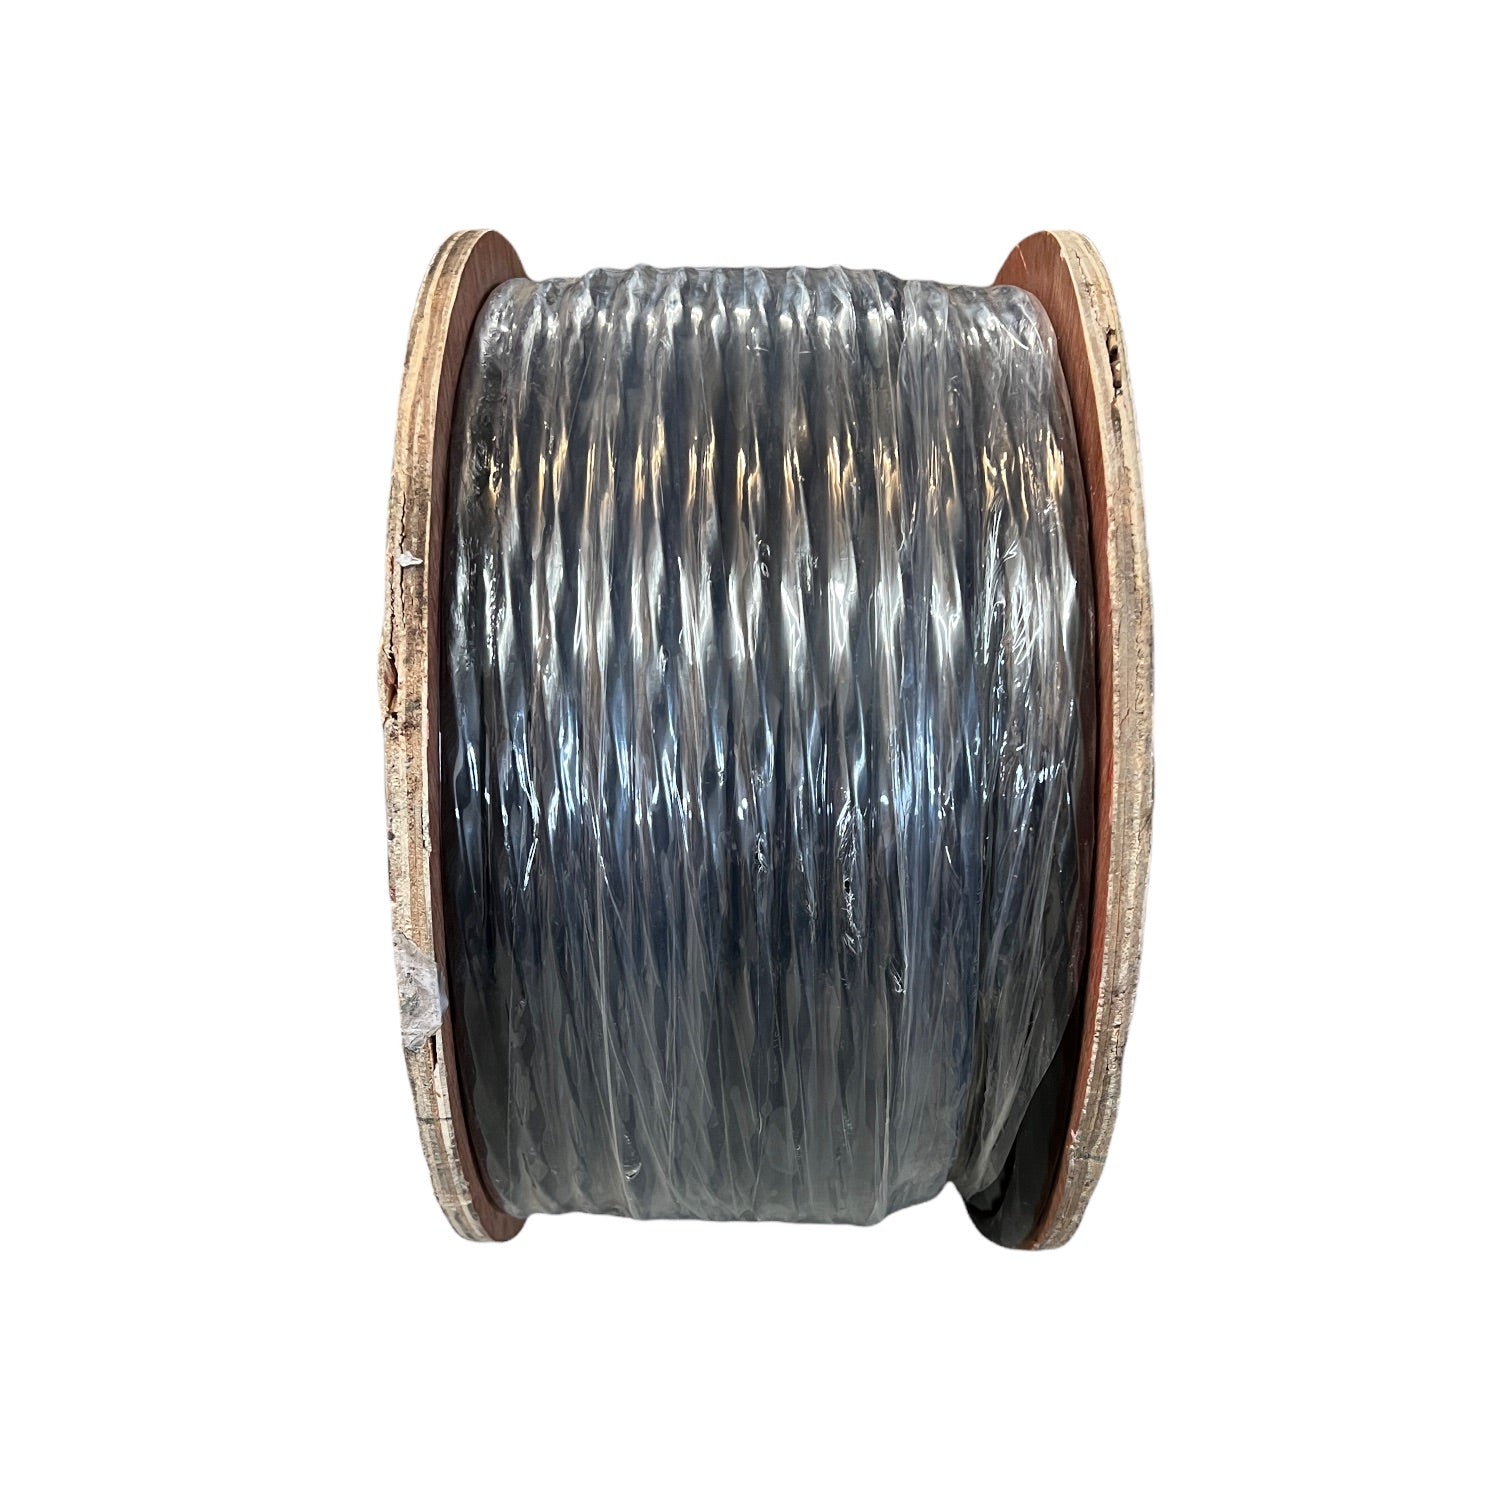 18/4X250 - Multi-Conductor Irrigation Control Wire, 18 awg, 18/4 X 250 ft